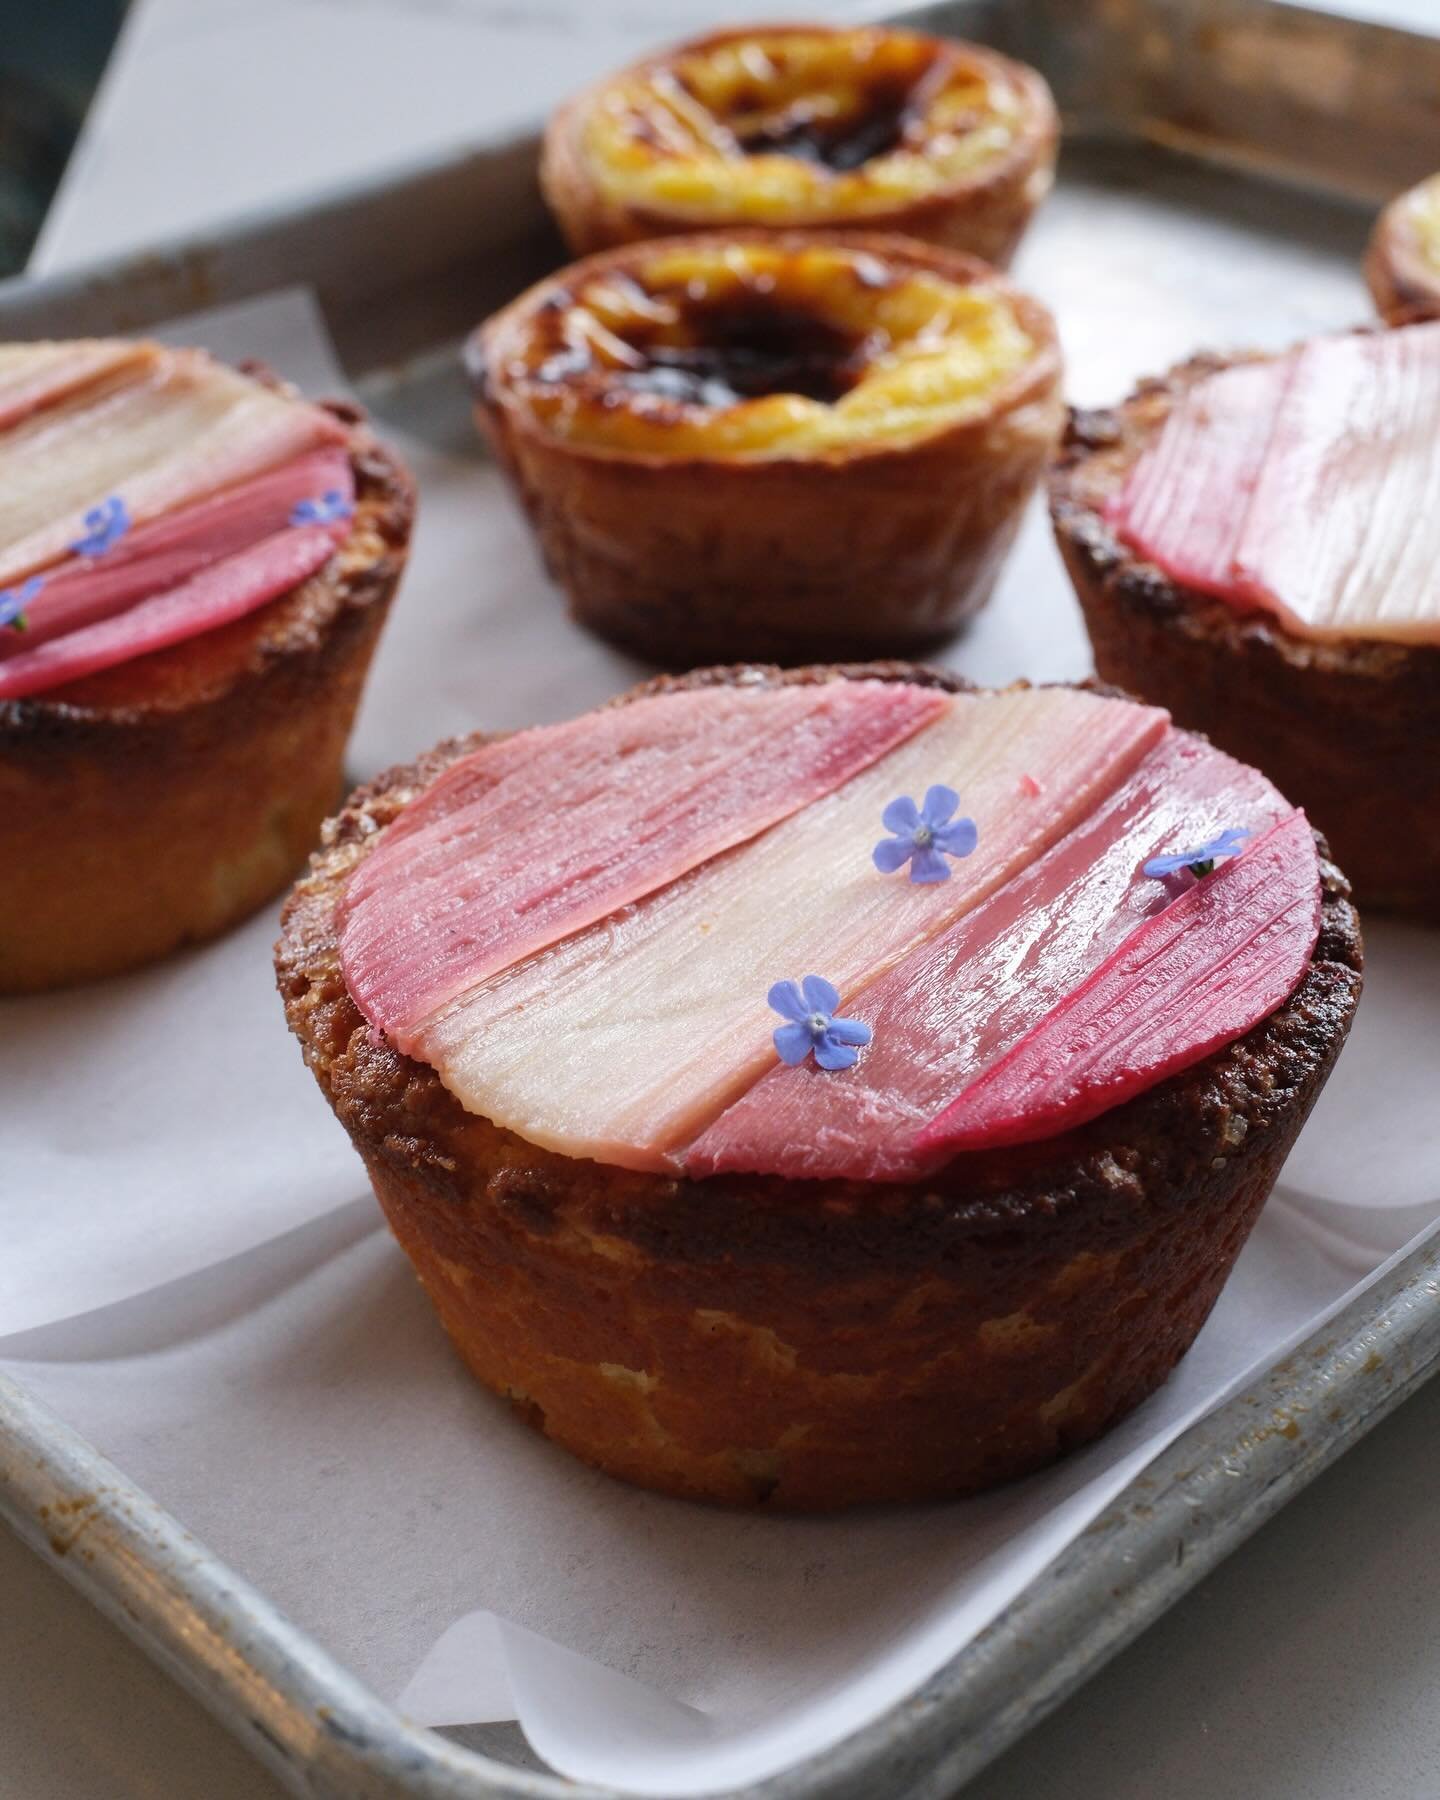 Chef Ellary has done it again!! 🤩 Her recent trip to Spain has inspired some delectable treats including Portuguese Egg Tarts and Yuzu-Rhubarb Ricotta Cakes. Stop in this morning to get your mouth around a warm pastry! Open until 3P! 
//
Ps. The Yuz